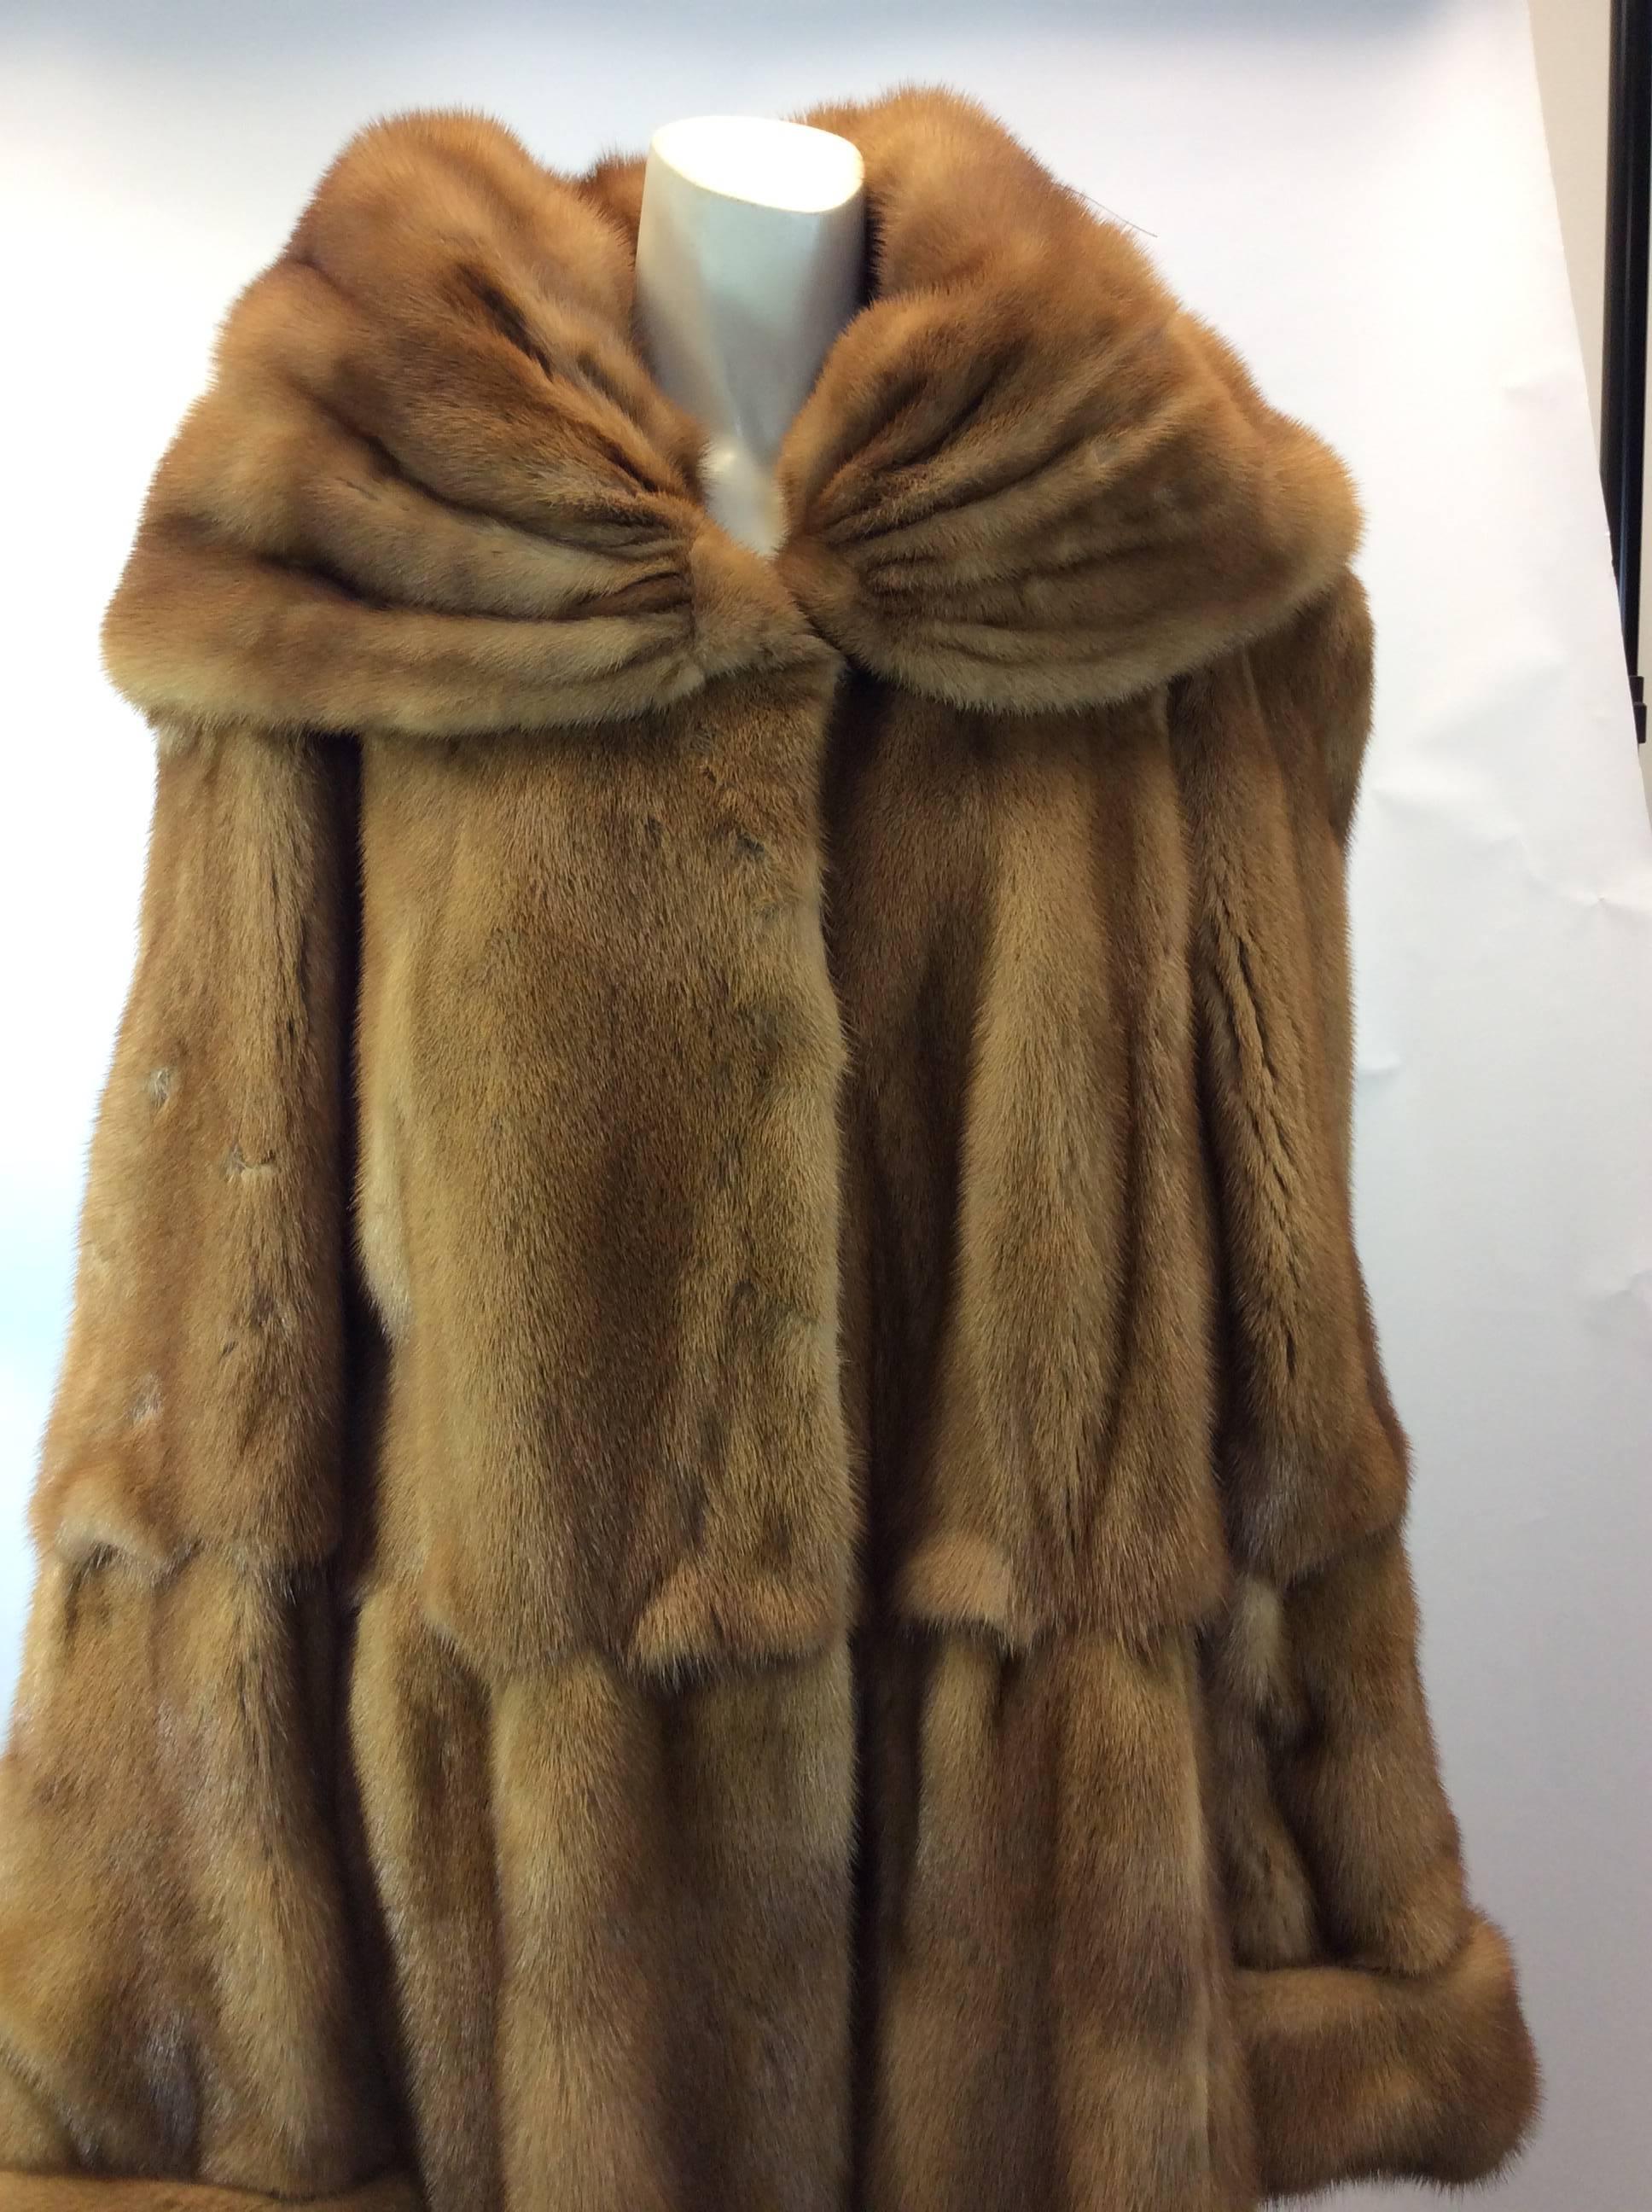 Full Length Tiered Chestnut Sable Fur Coat
$899
Stunning collar
Center closures
Please see photo of top closure, it is stretched
Fully linted interior